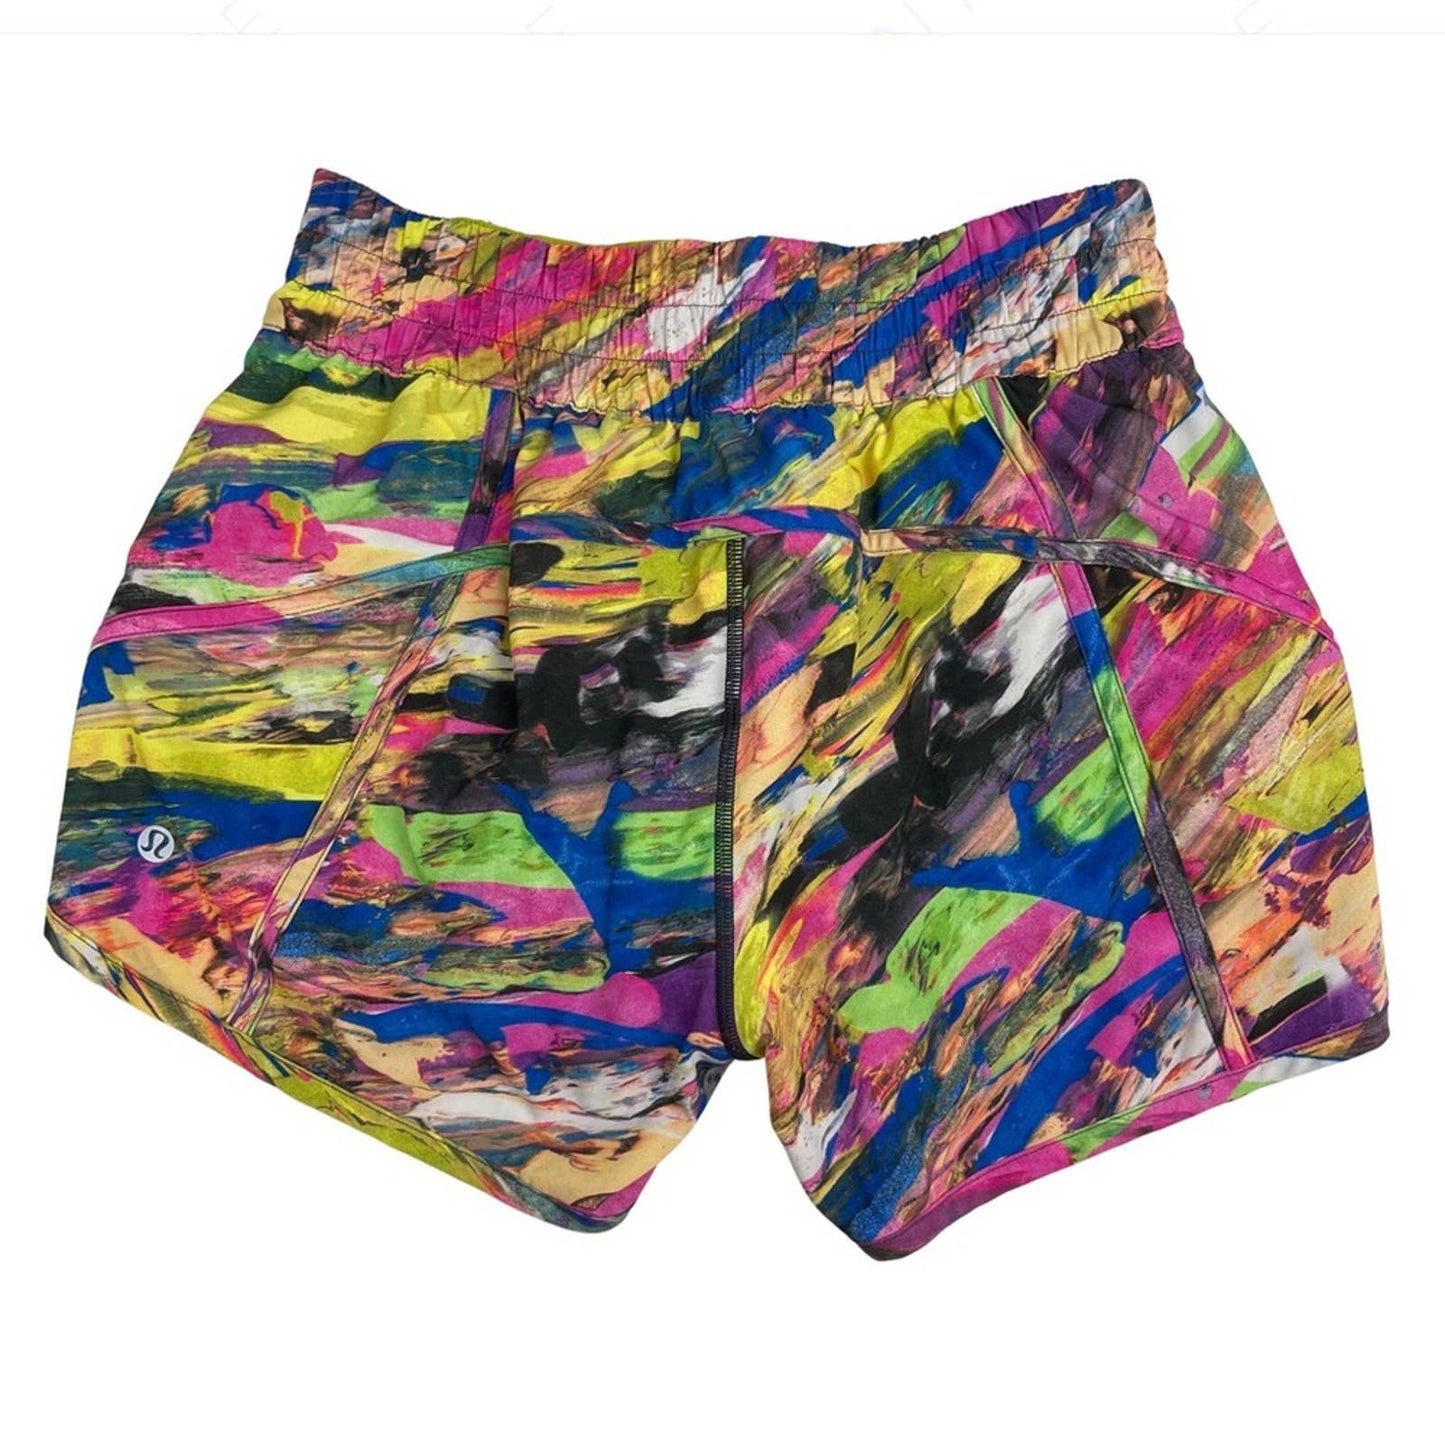 Lululemon Tracker Shorts V 4" Catalyst Multi Electric Abstract 90s Y2K Style Size 6